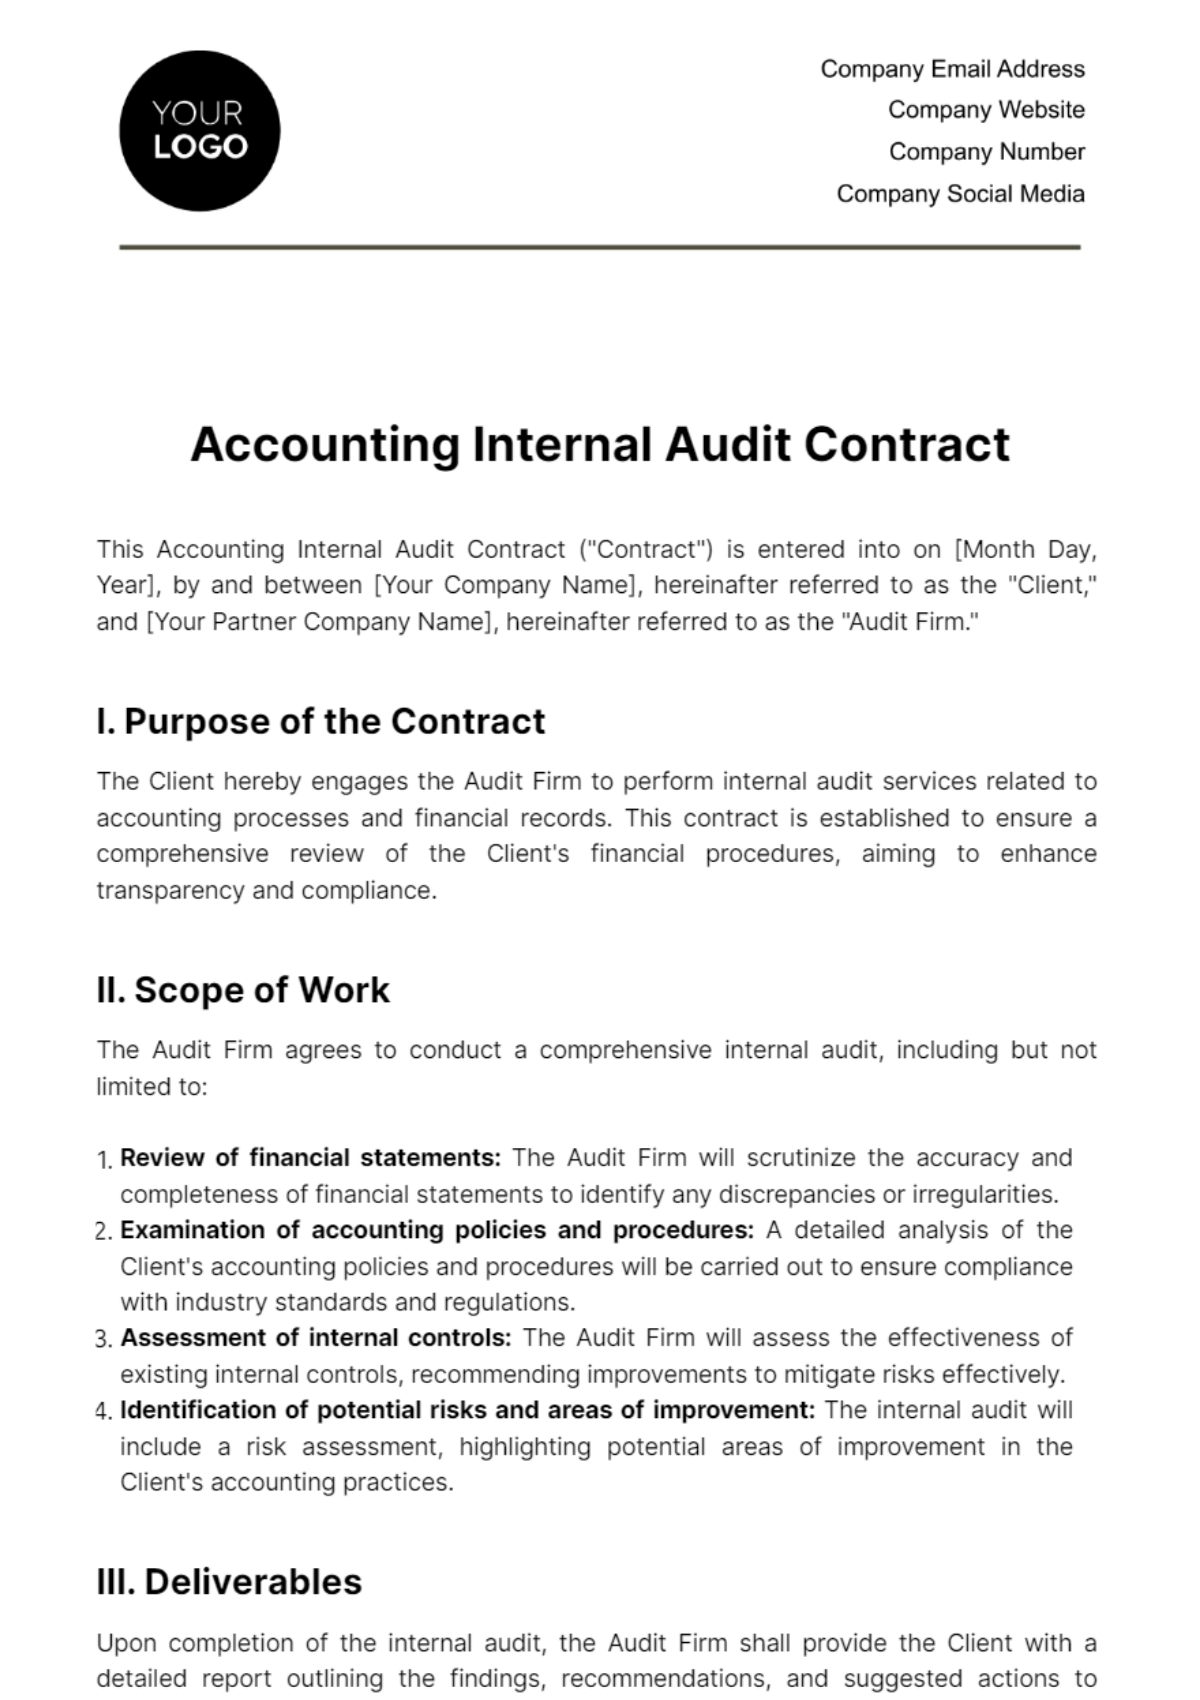 Free Accounting Internal Audit Contract Template